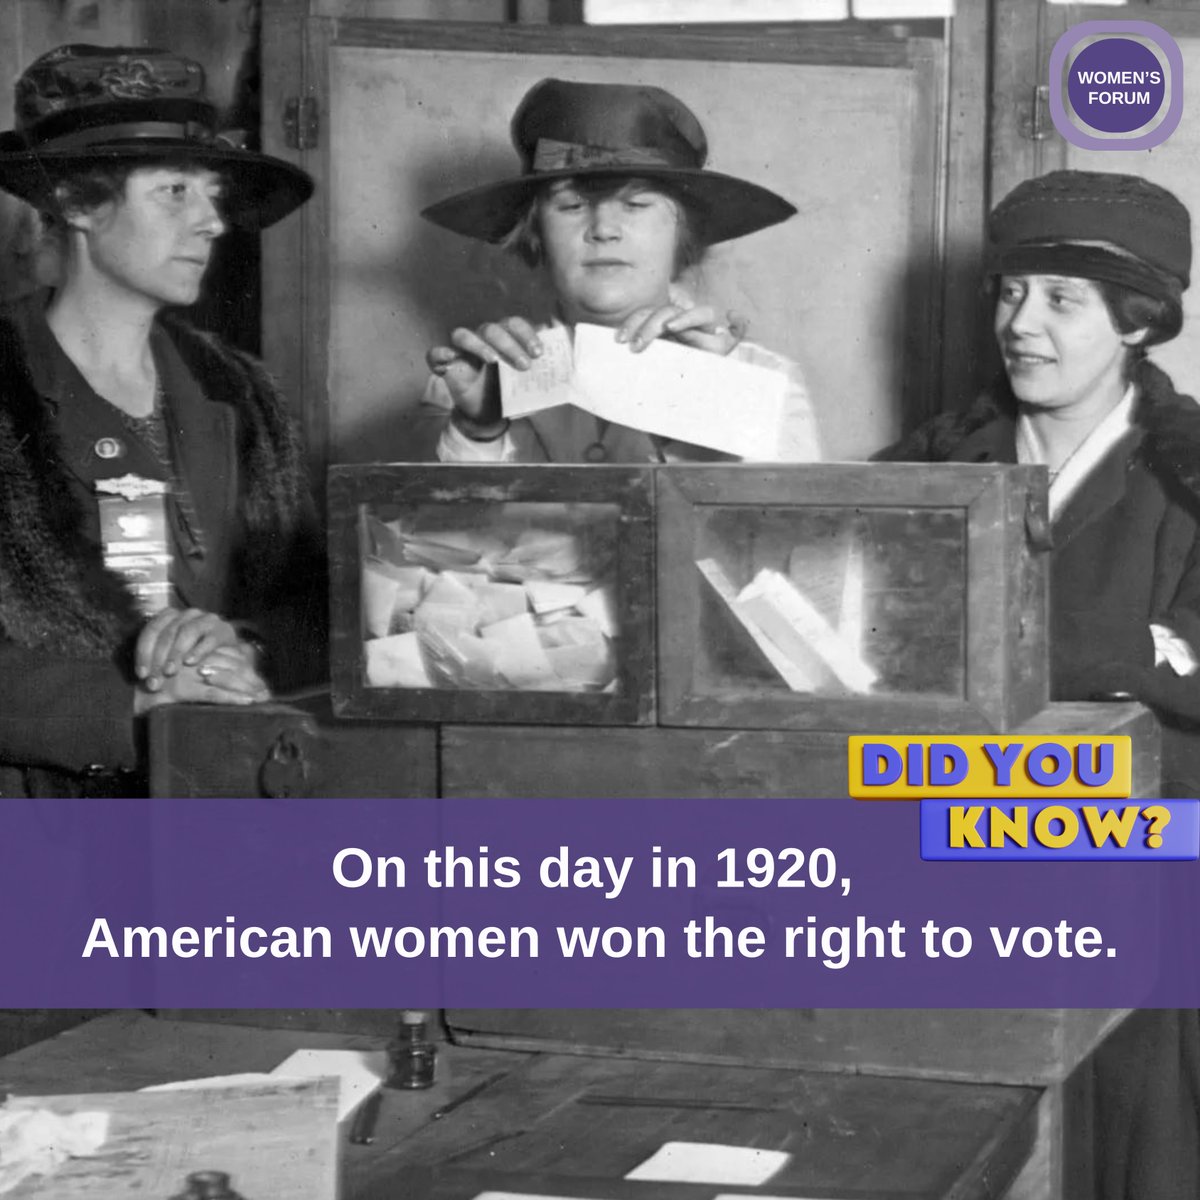 Did you know that #OnThisDay in 1920, American women won the right to vote? 🗳️ While we celebrate this milestone, let's also acknowledge that there's still much work to be done to achieve true equality. Let us use this day to reflect on progress made!